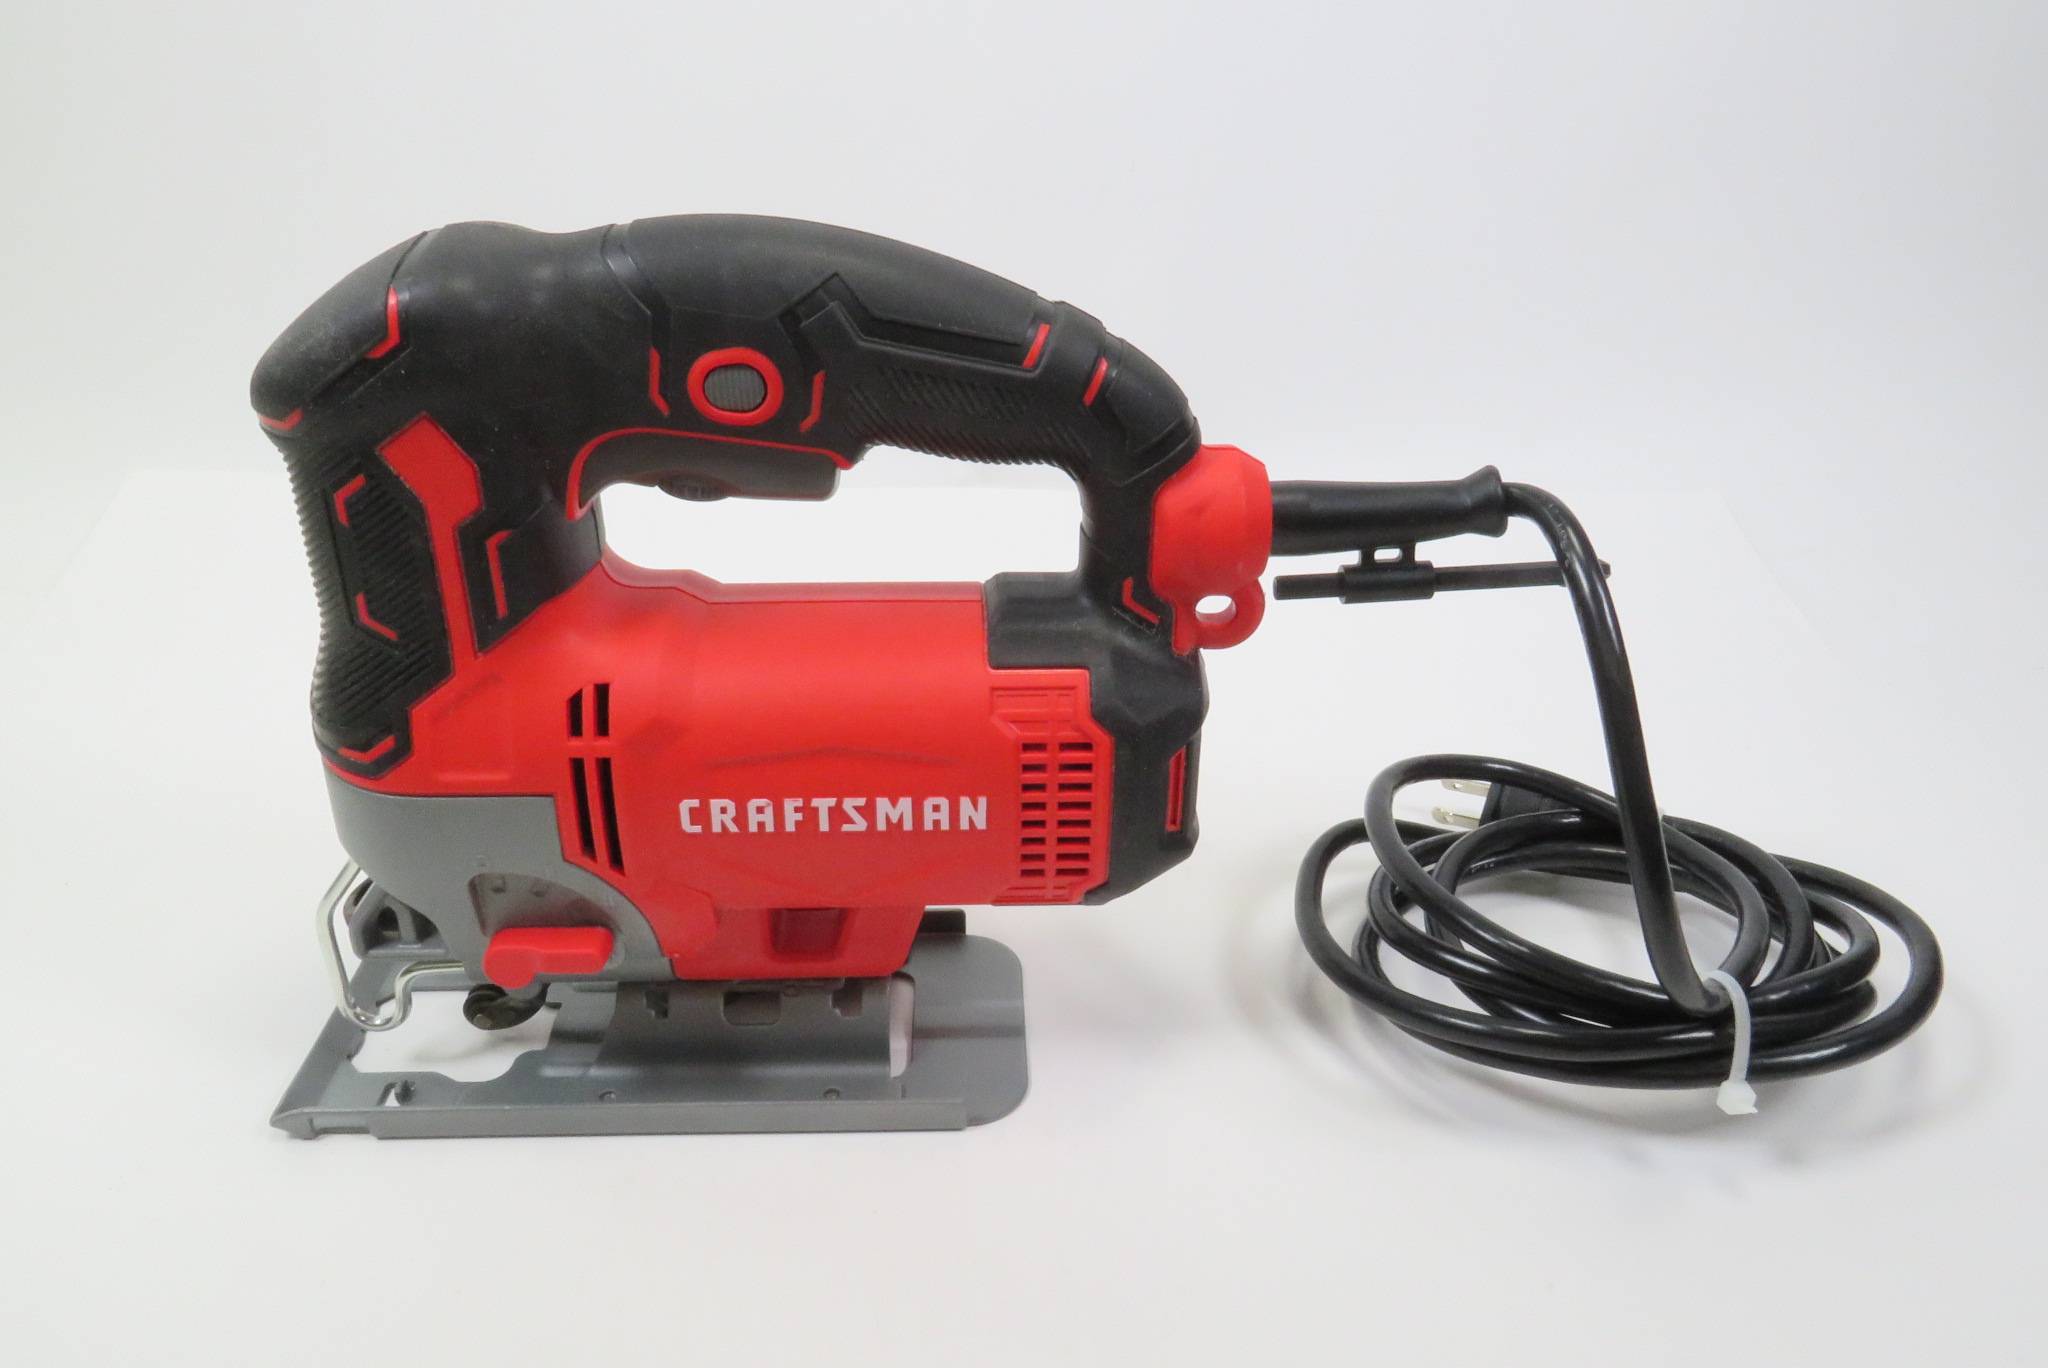 Craftsman CMES612 6 Amp Corded Jig Saw